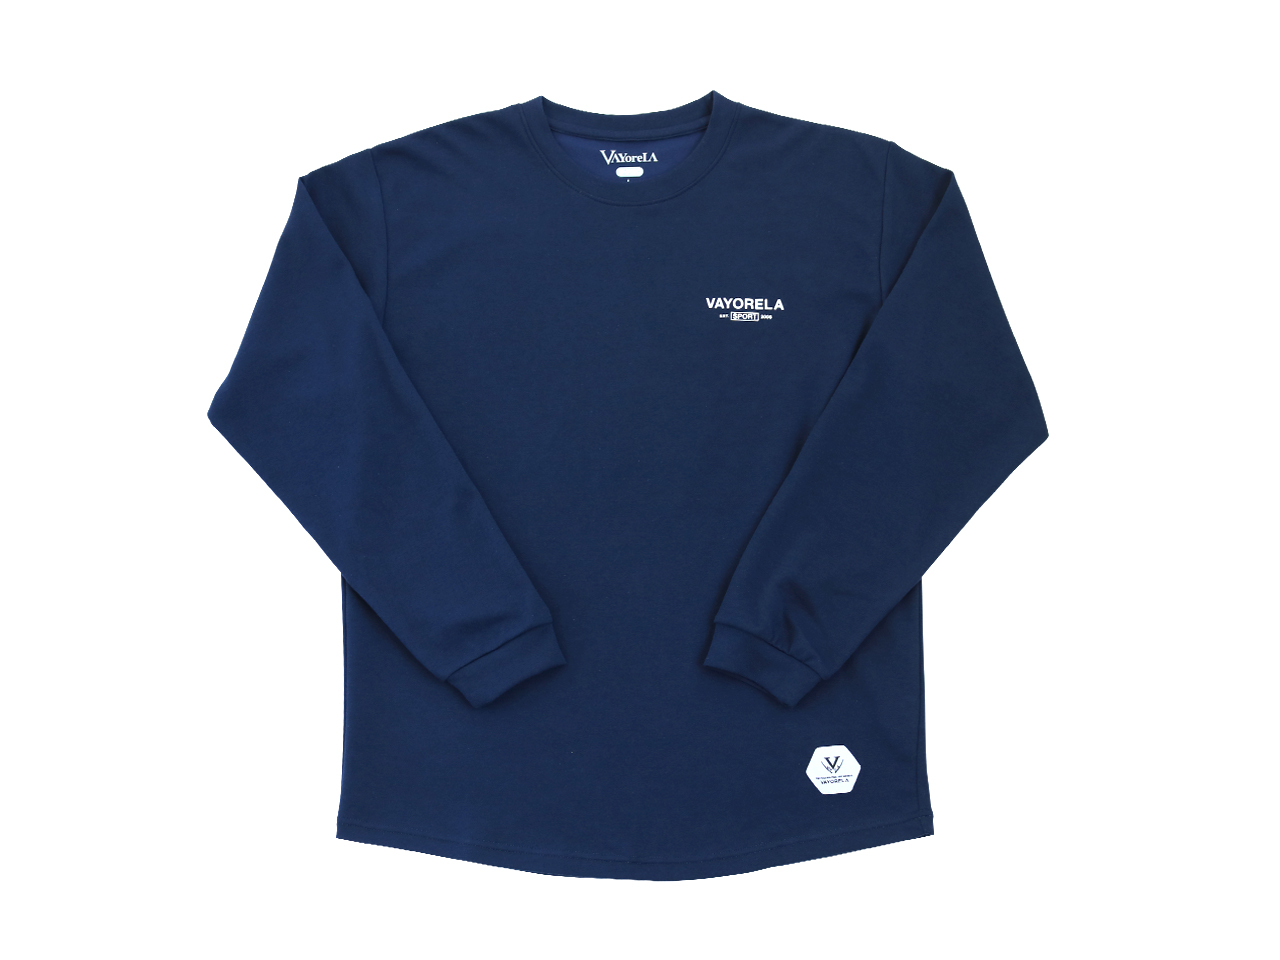 POINT LOGO L/S TEE - NVY 写真1